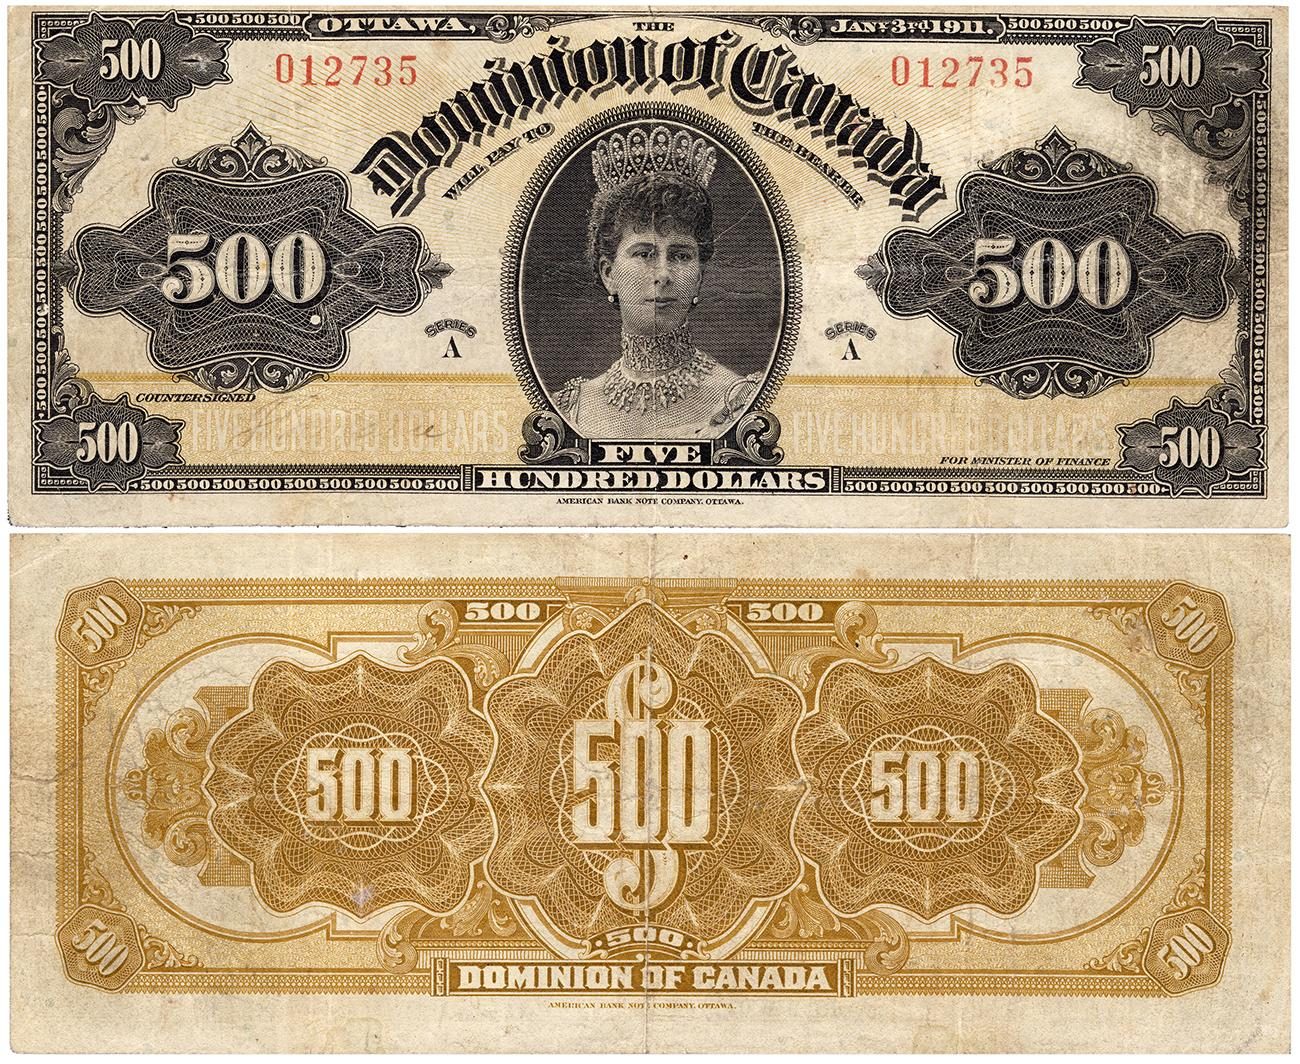 Bank note, two sides, engraving of woman in a crown and with elaborate geometric patterns on the back.